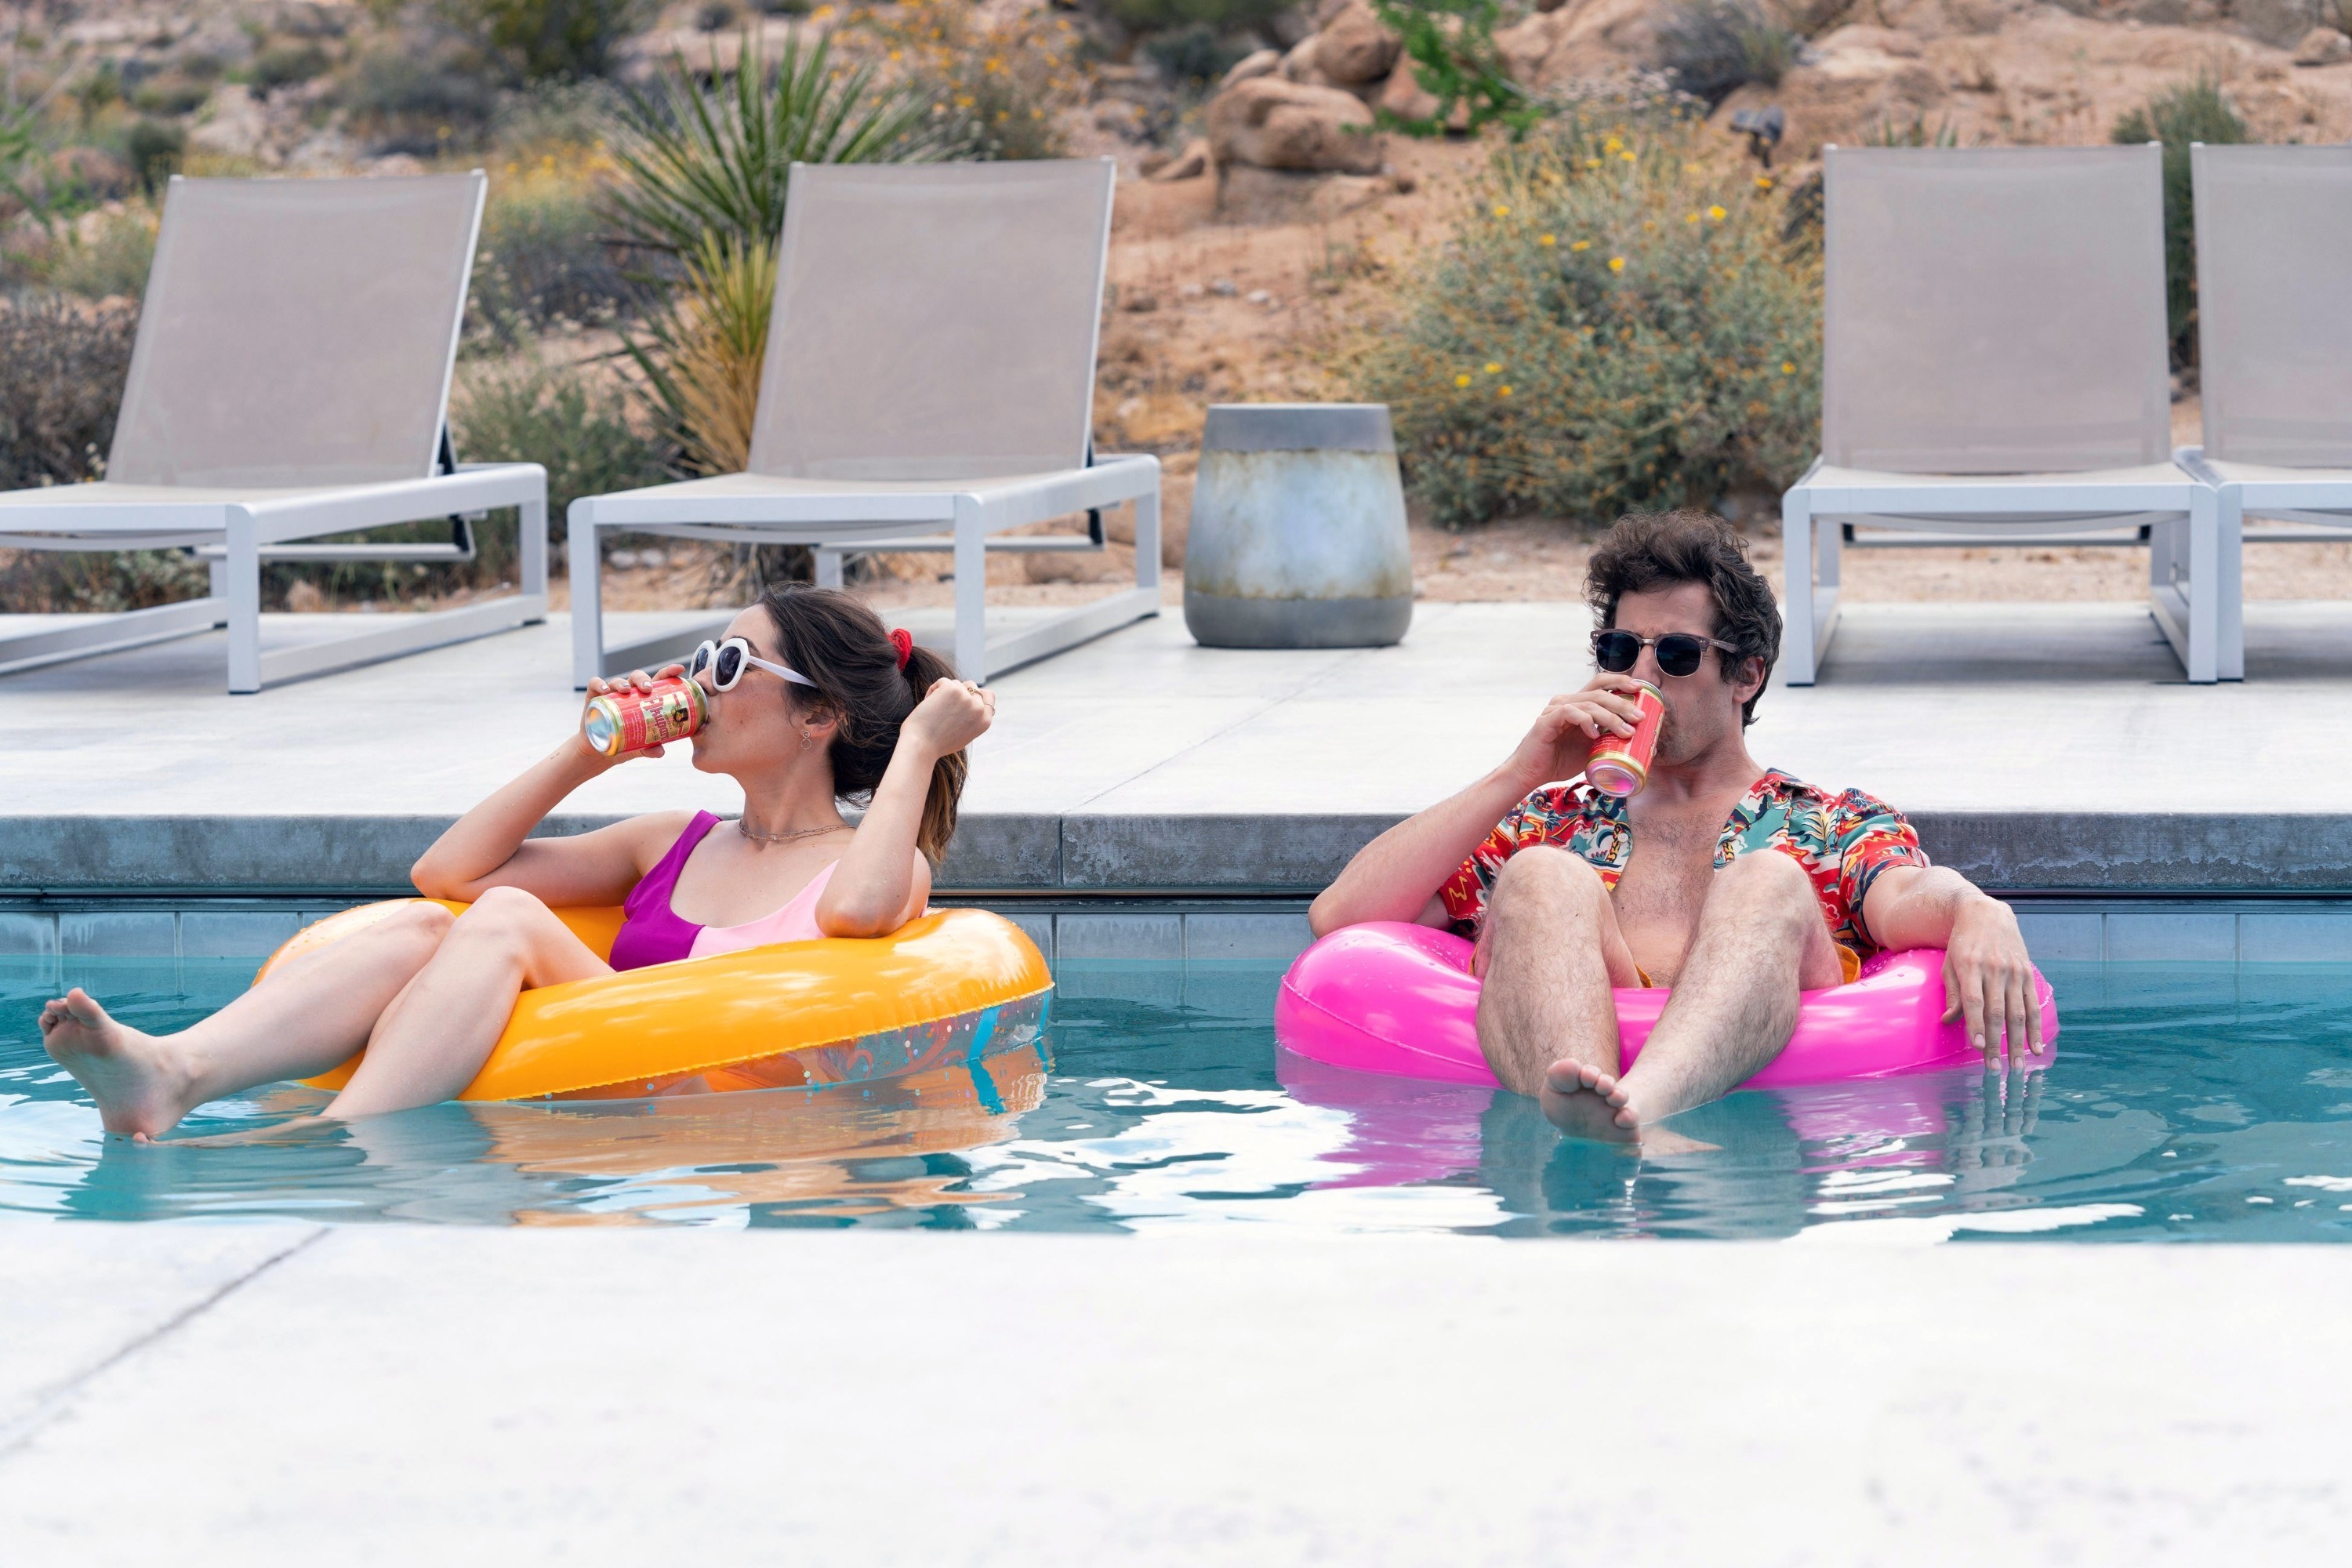 Sarah and Niles drink beverages while sitting in floaties in a pool